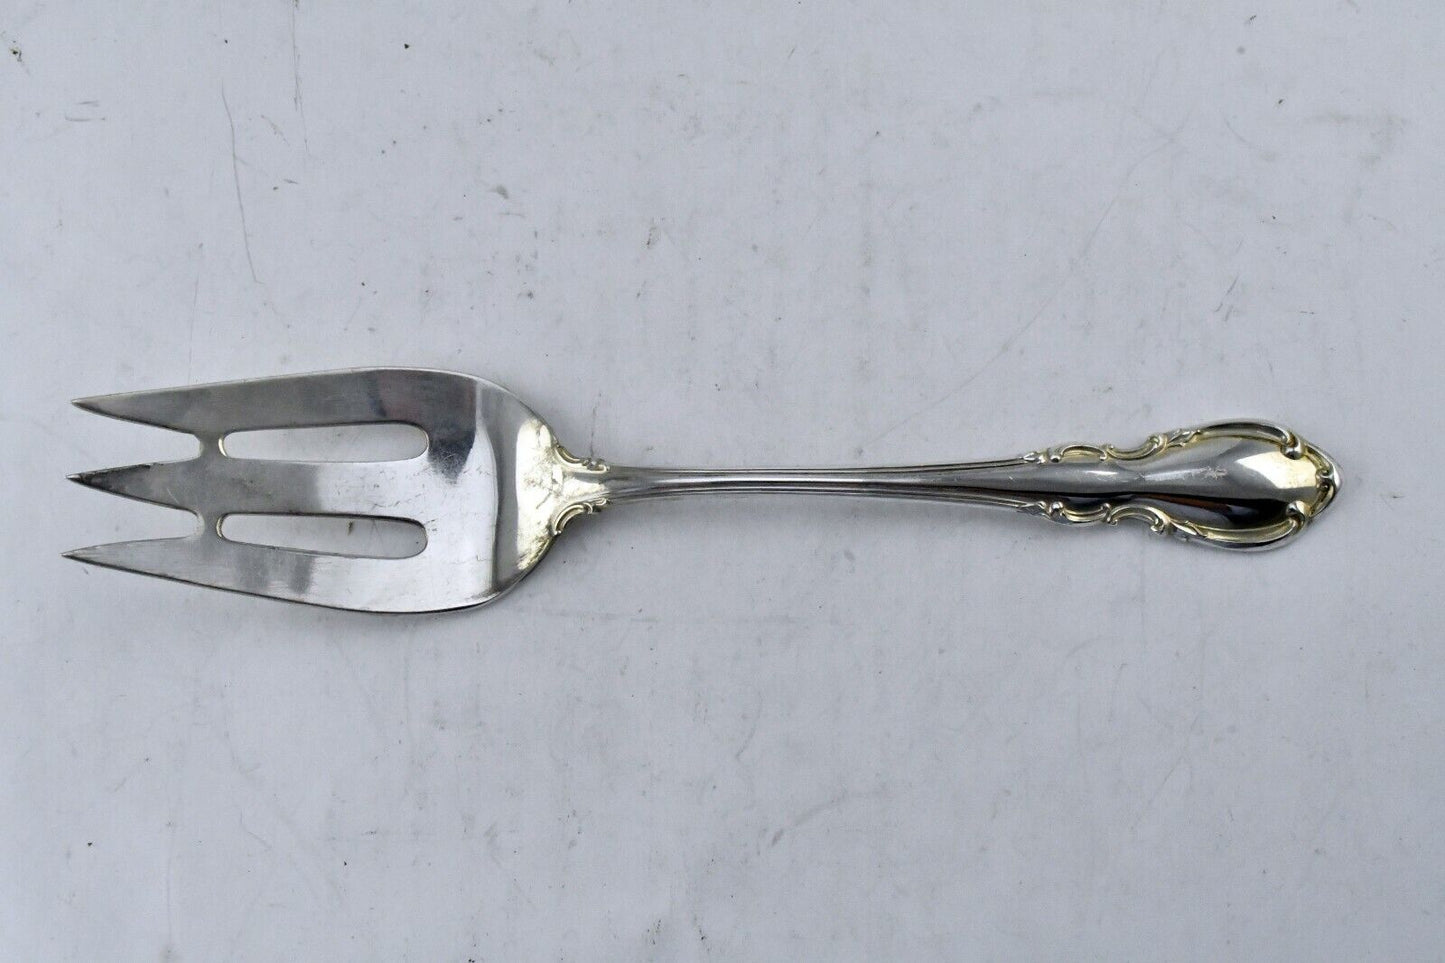 Legato by Towle Sterling Silver 9" Large Cold Meat Serving Fork 2.7 oz.